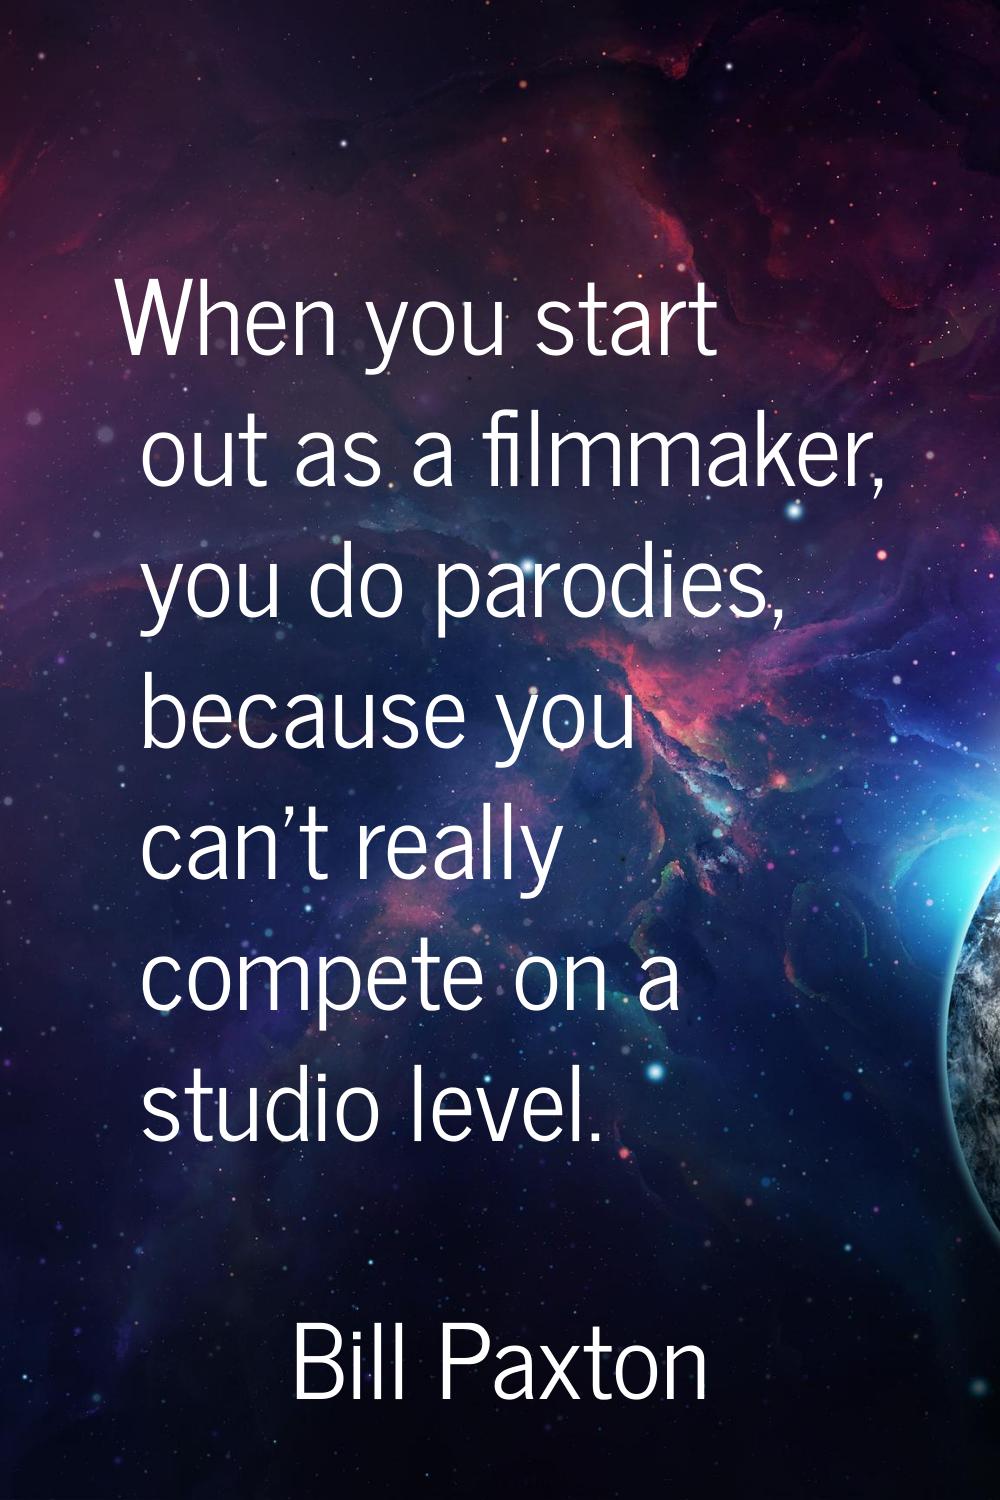 When you start out as a filmmaker, you do parodies, because you can't really compete on a studio le